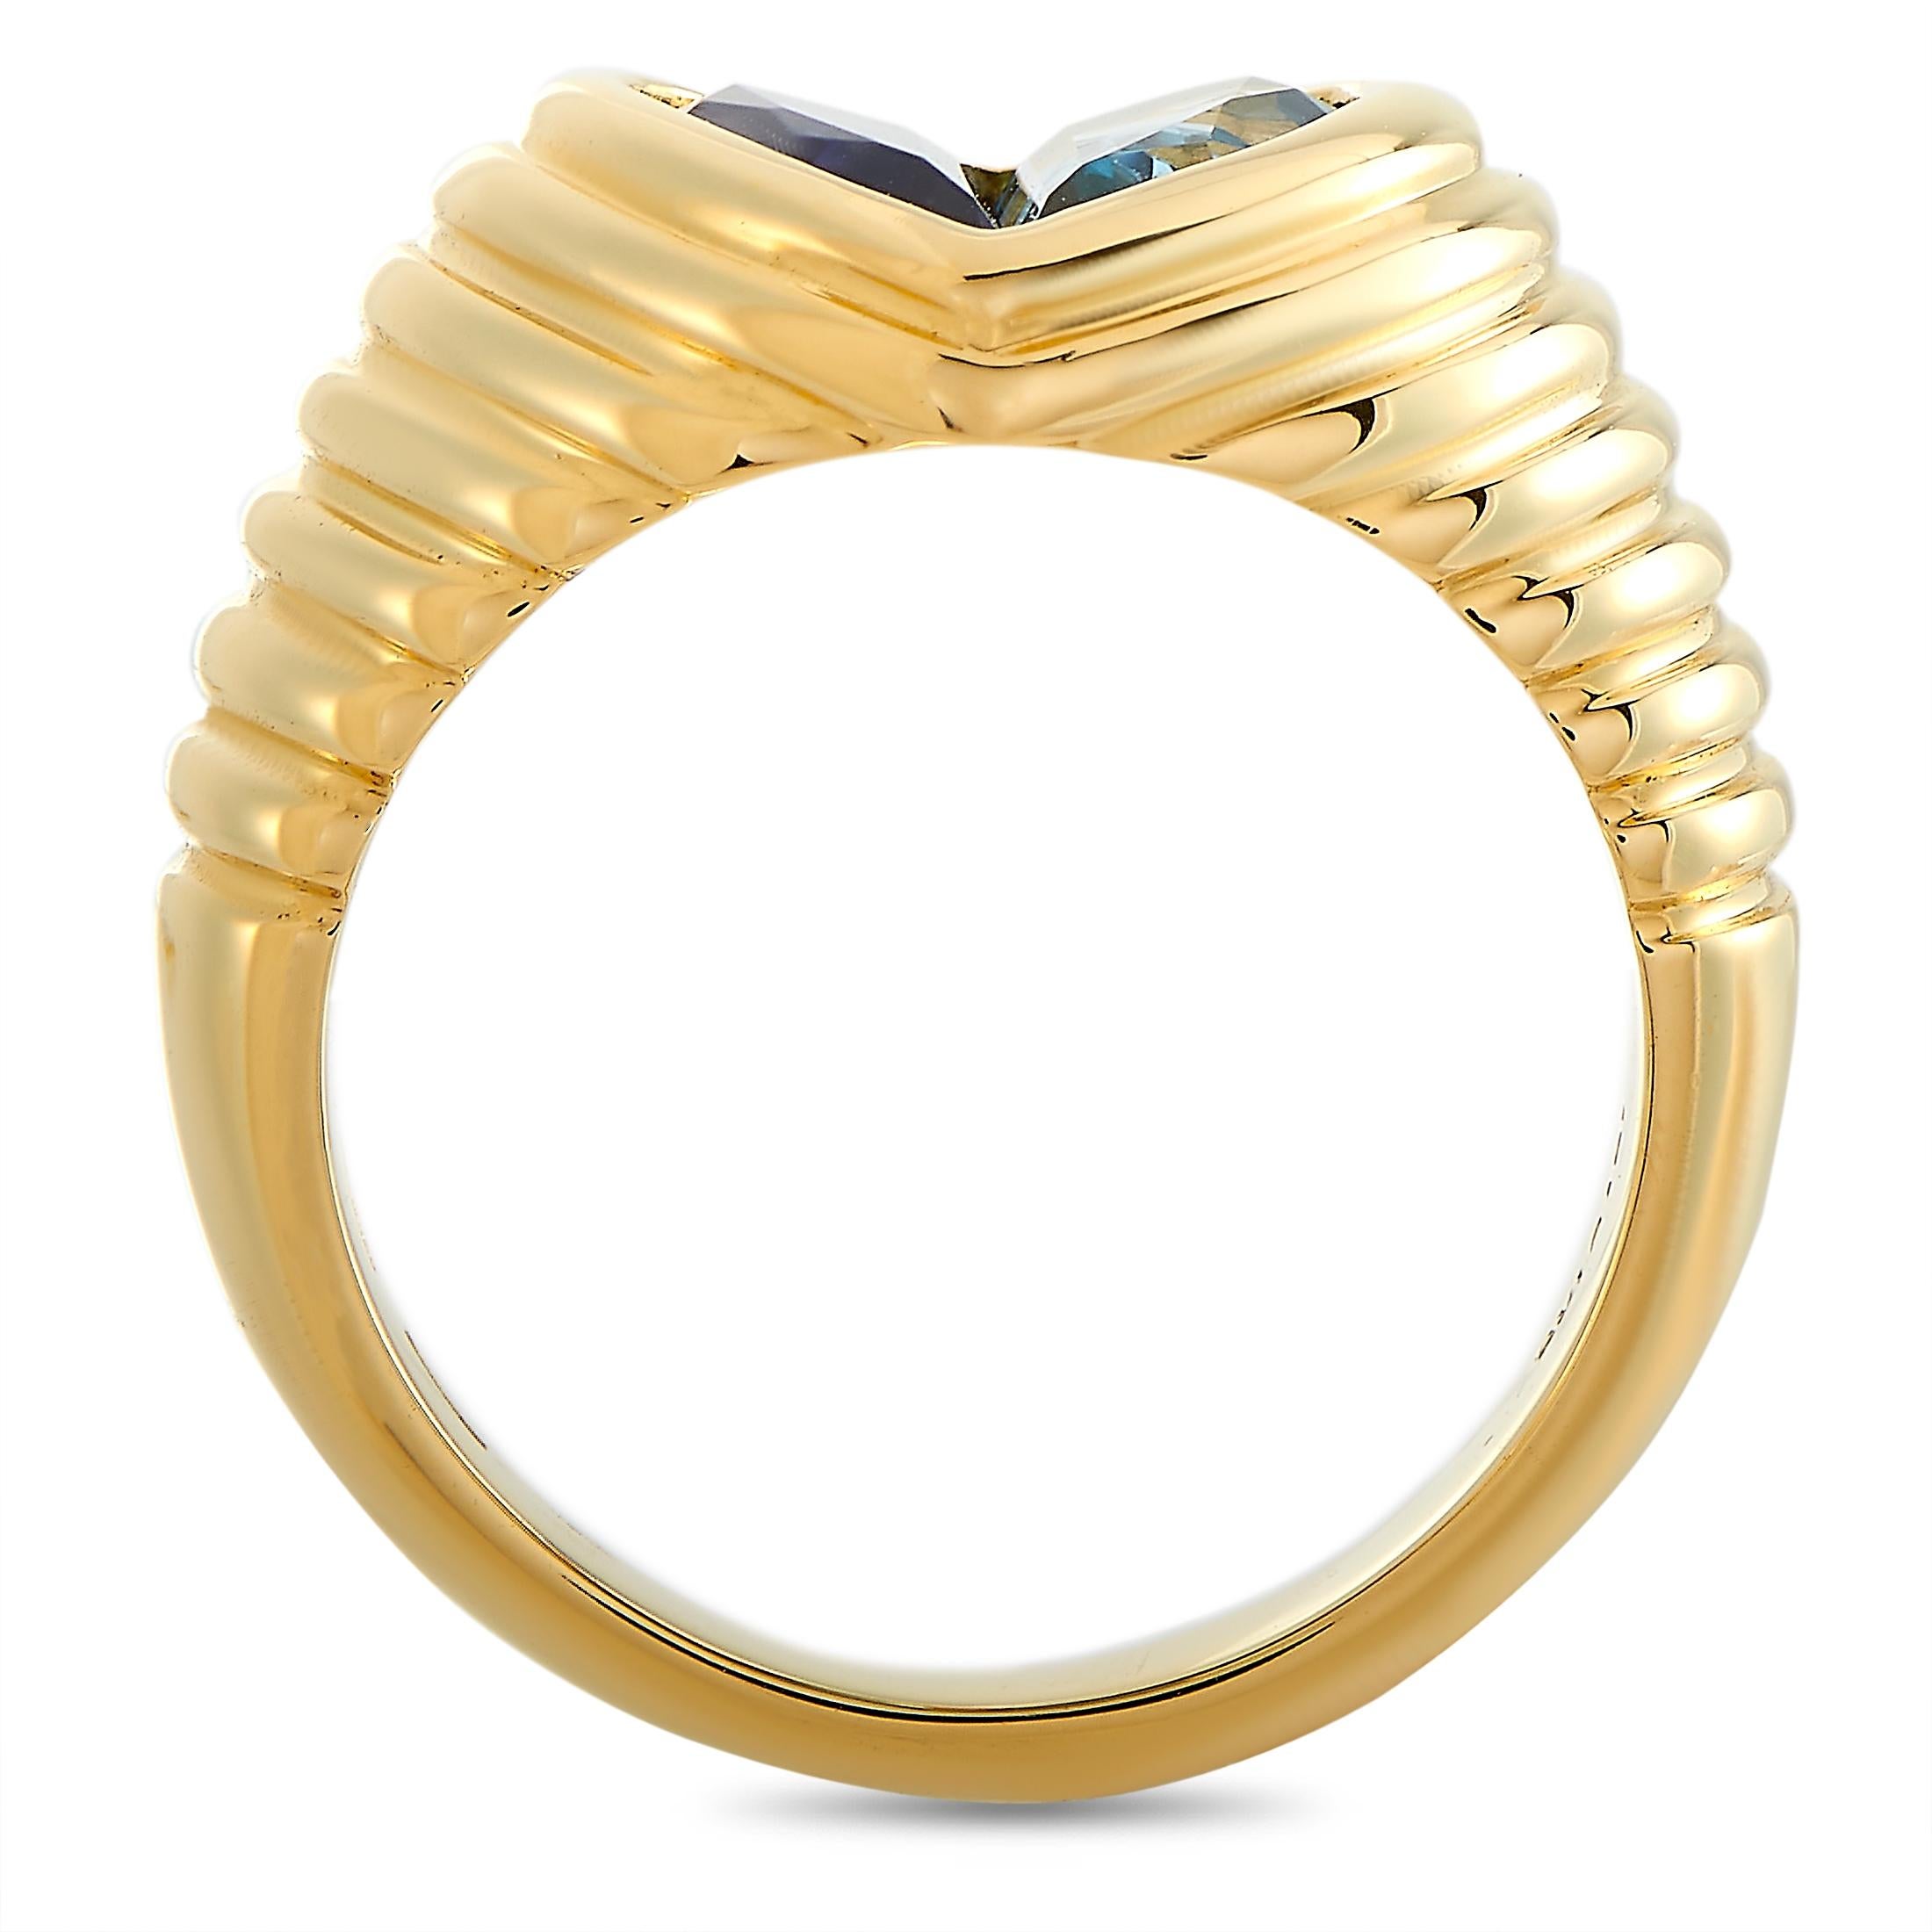 The Bvlgari “Doppio” ring is made of 18K yellow gold and embellished with a topaz and an iolite. The ring weighs 12.1 grams and boasts band thickness of 4 mm and top height of 5 mm, while top dimensions measure 12 by 11 mm.
 
 This jewelry piece is